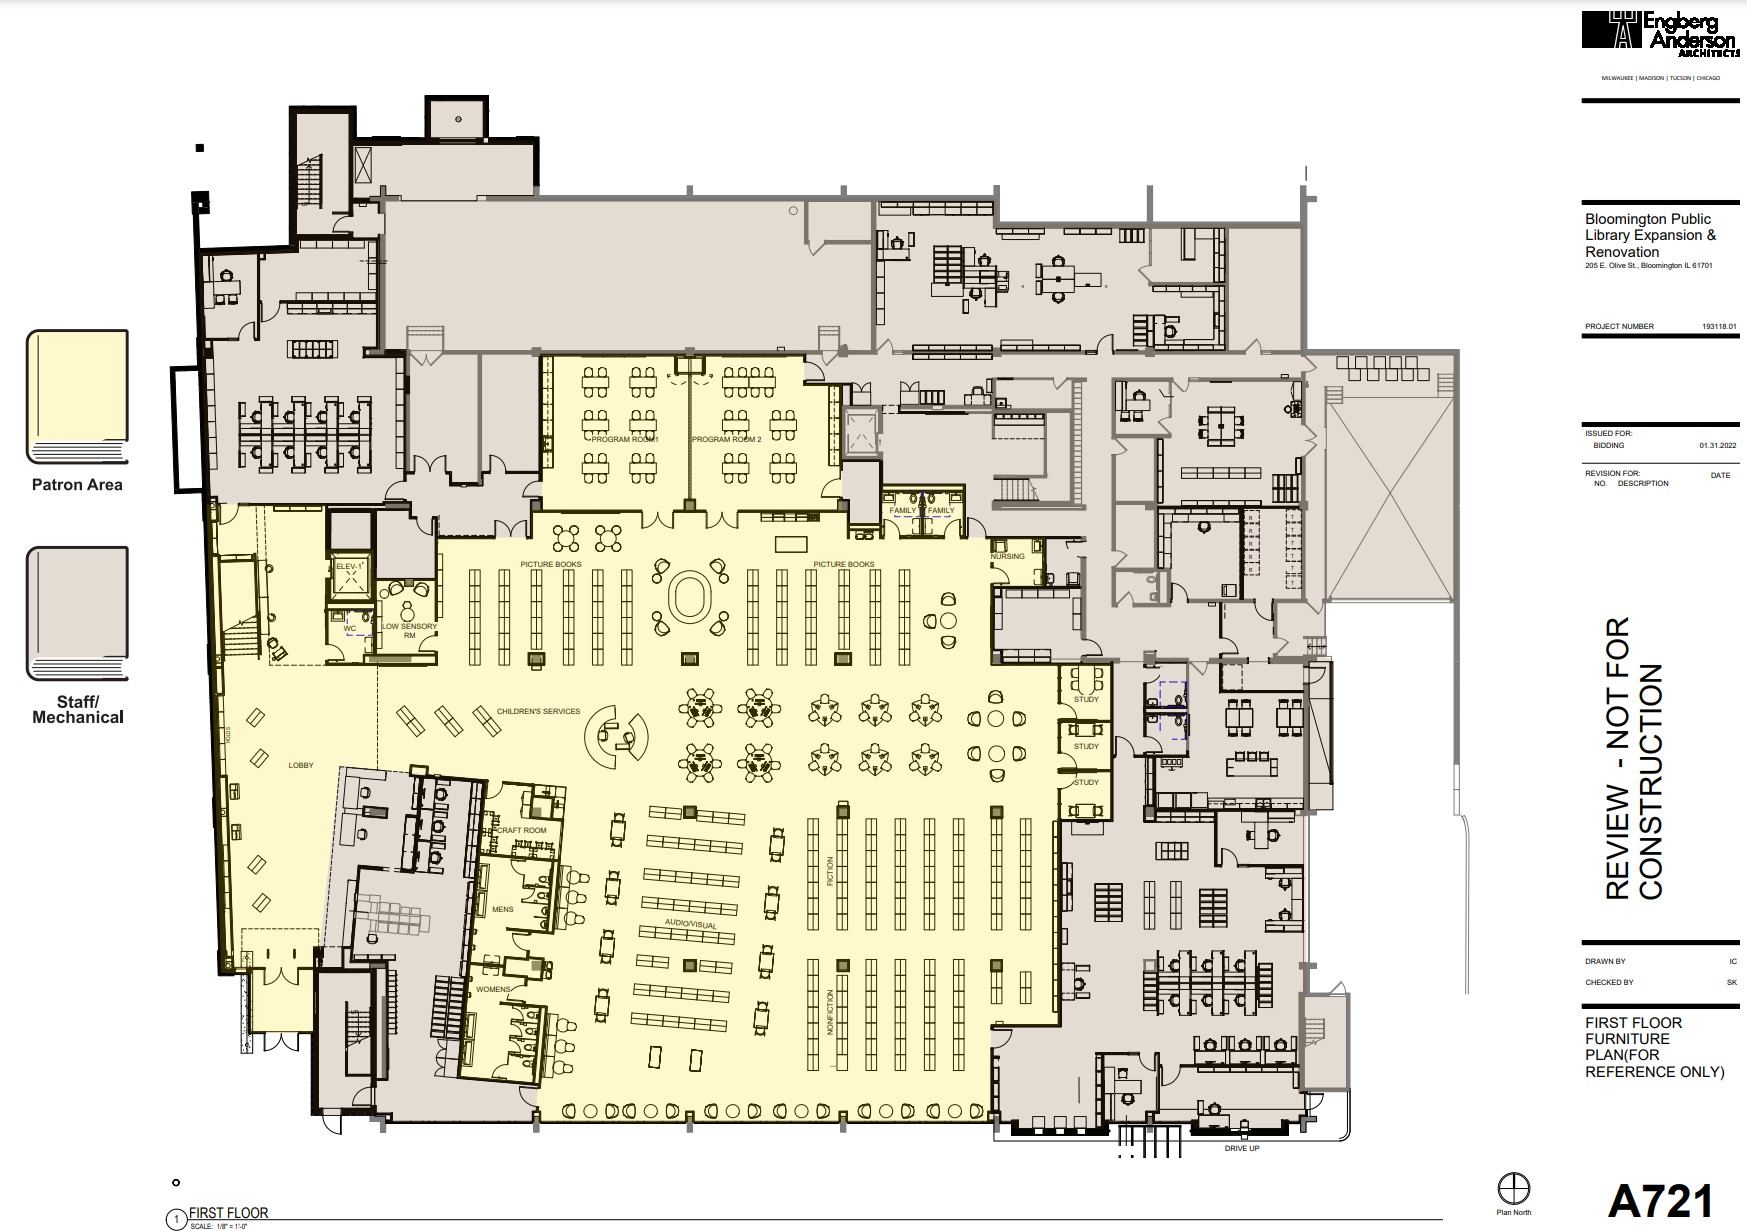 Proposed 1st floor layout